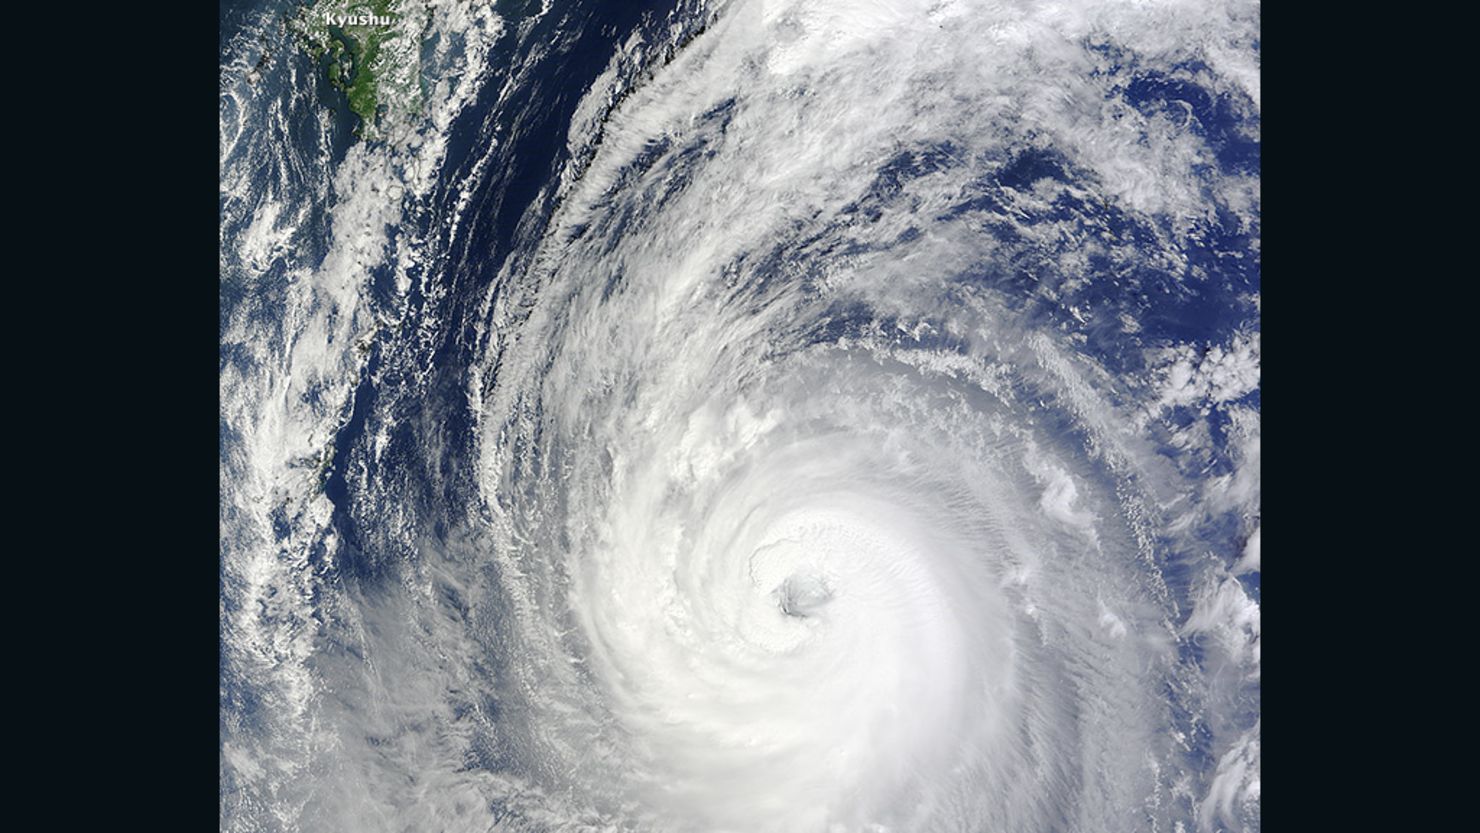 Three U.S. airmen and a surfer were lost at sea Sunday after Typhoon Phanfone struck Japan.